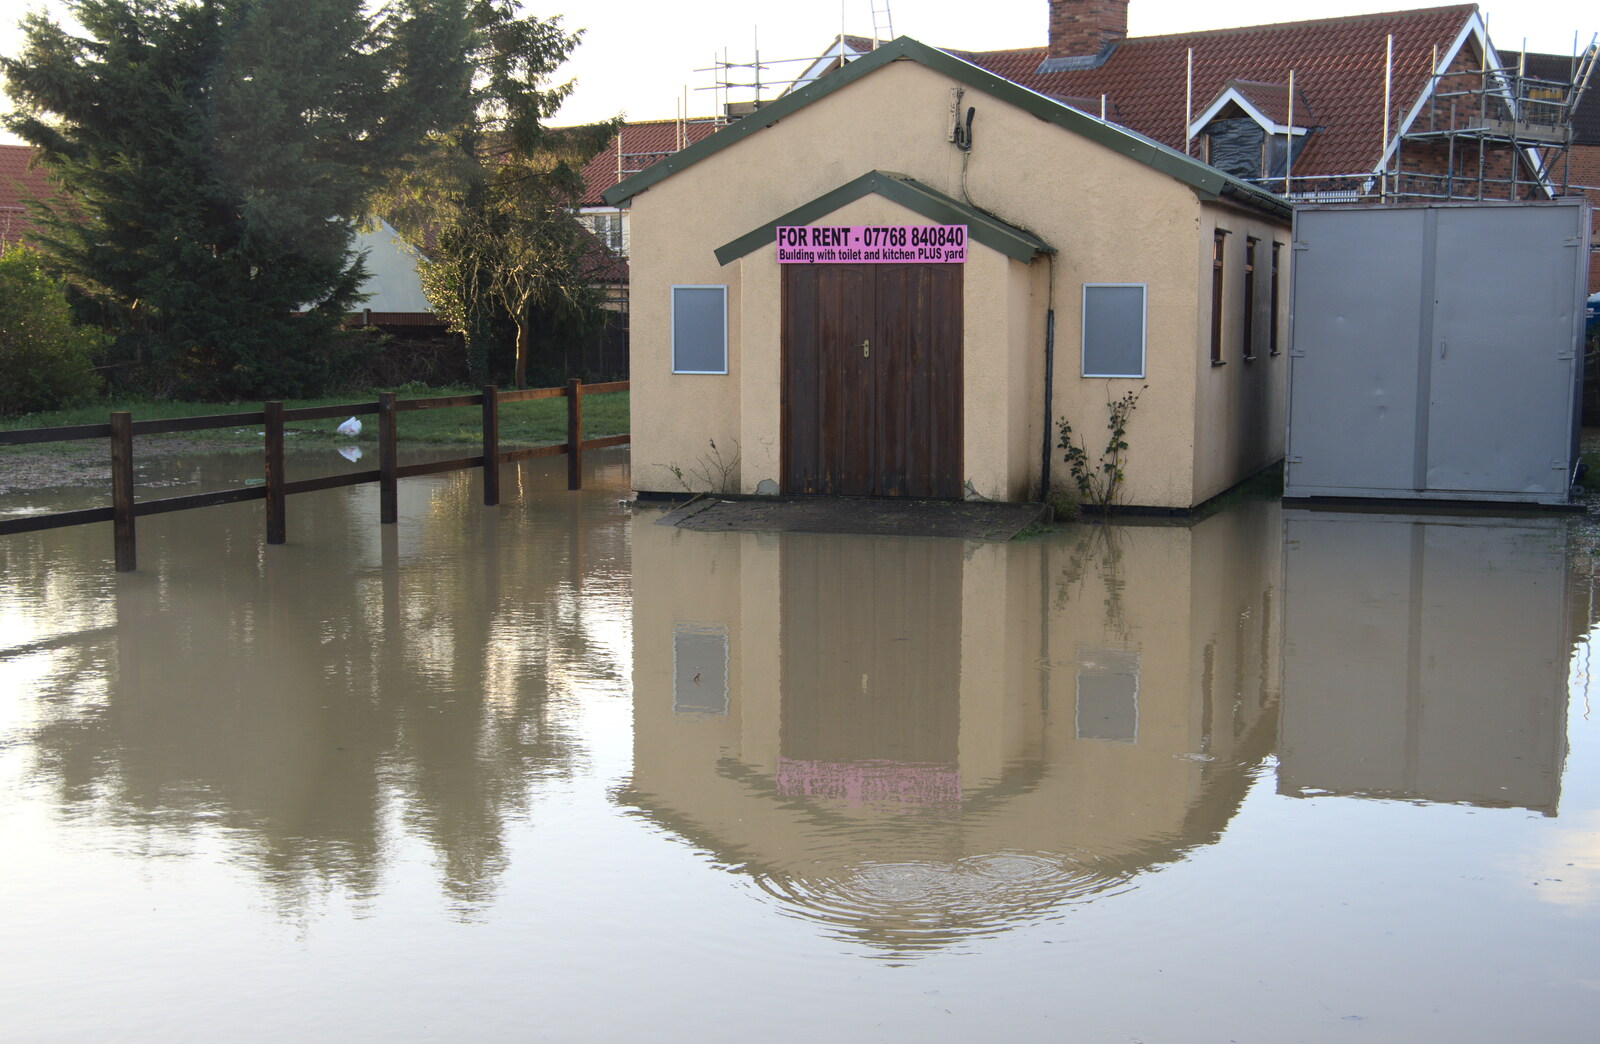 The old chapel from The Christmas Eve Floods, Diss, Norfolk - 24th December 2020